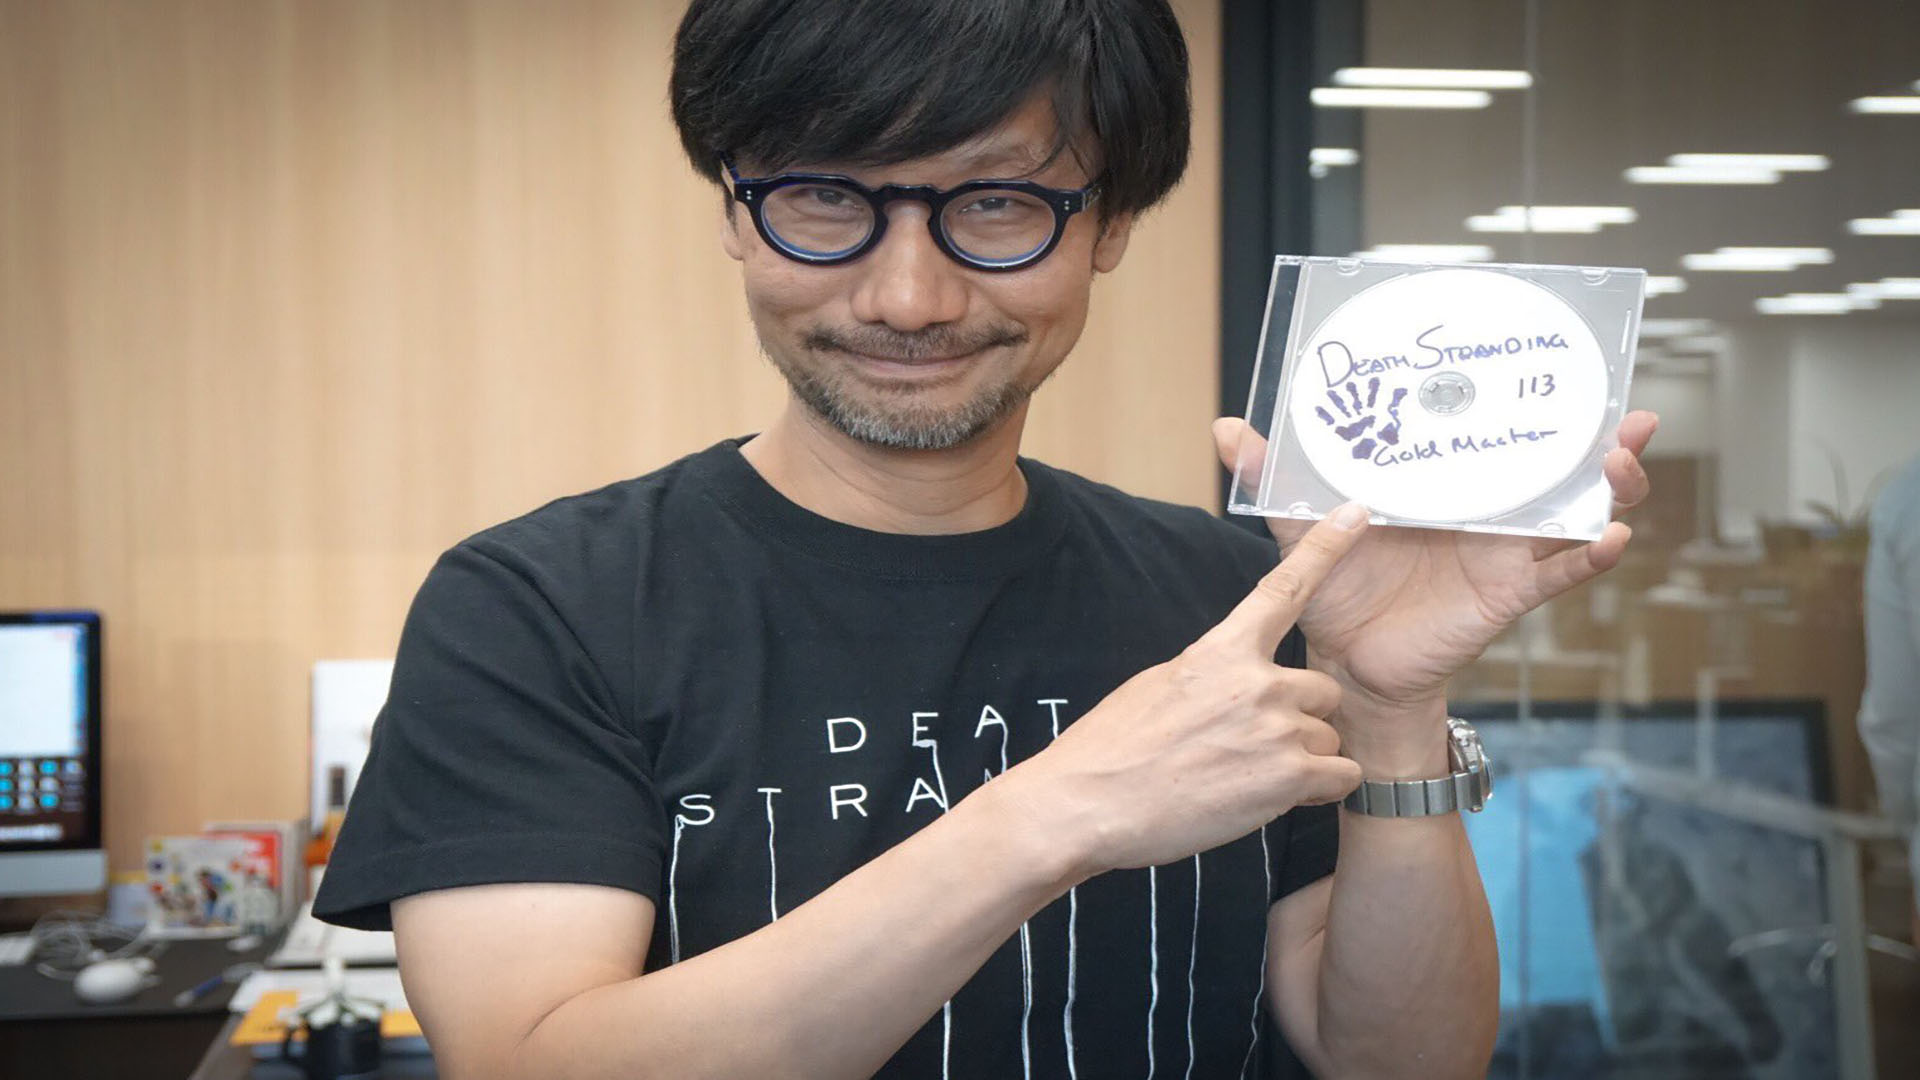 Hideo Kojima Daily Musings Posted on Twitter